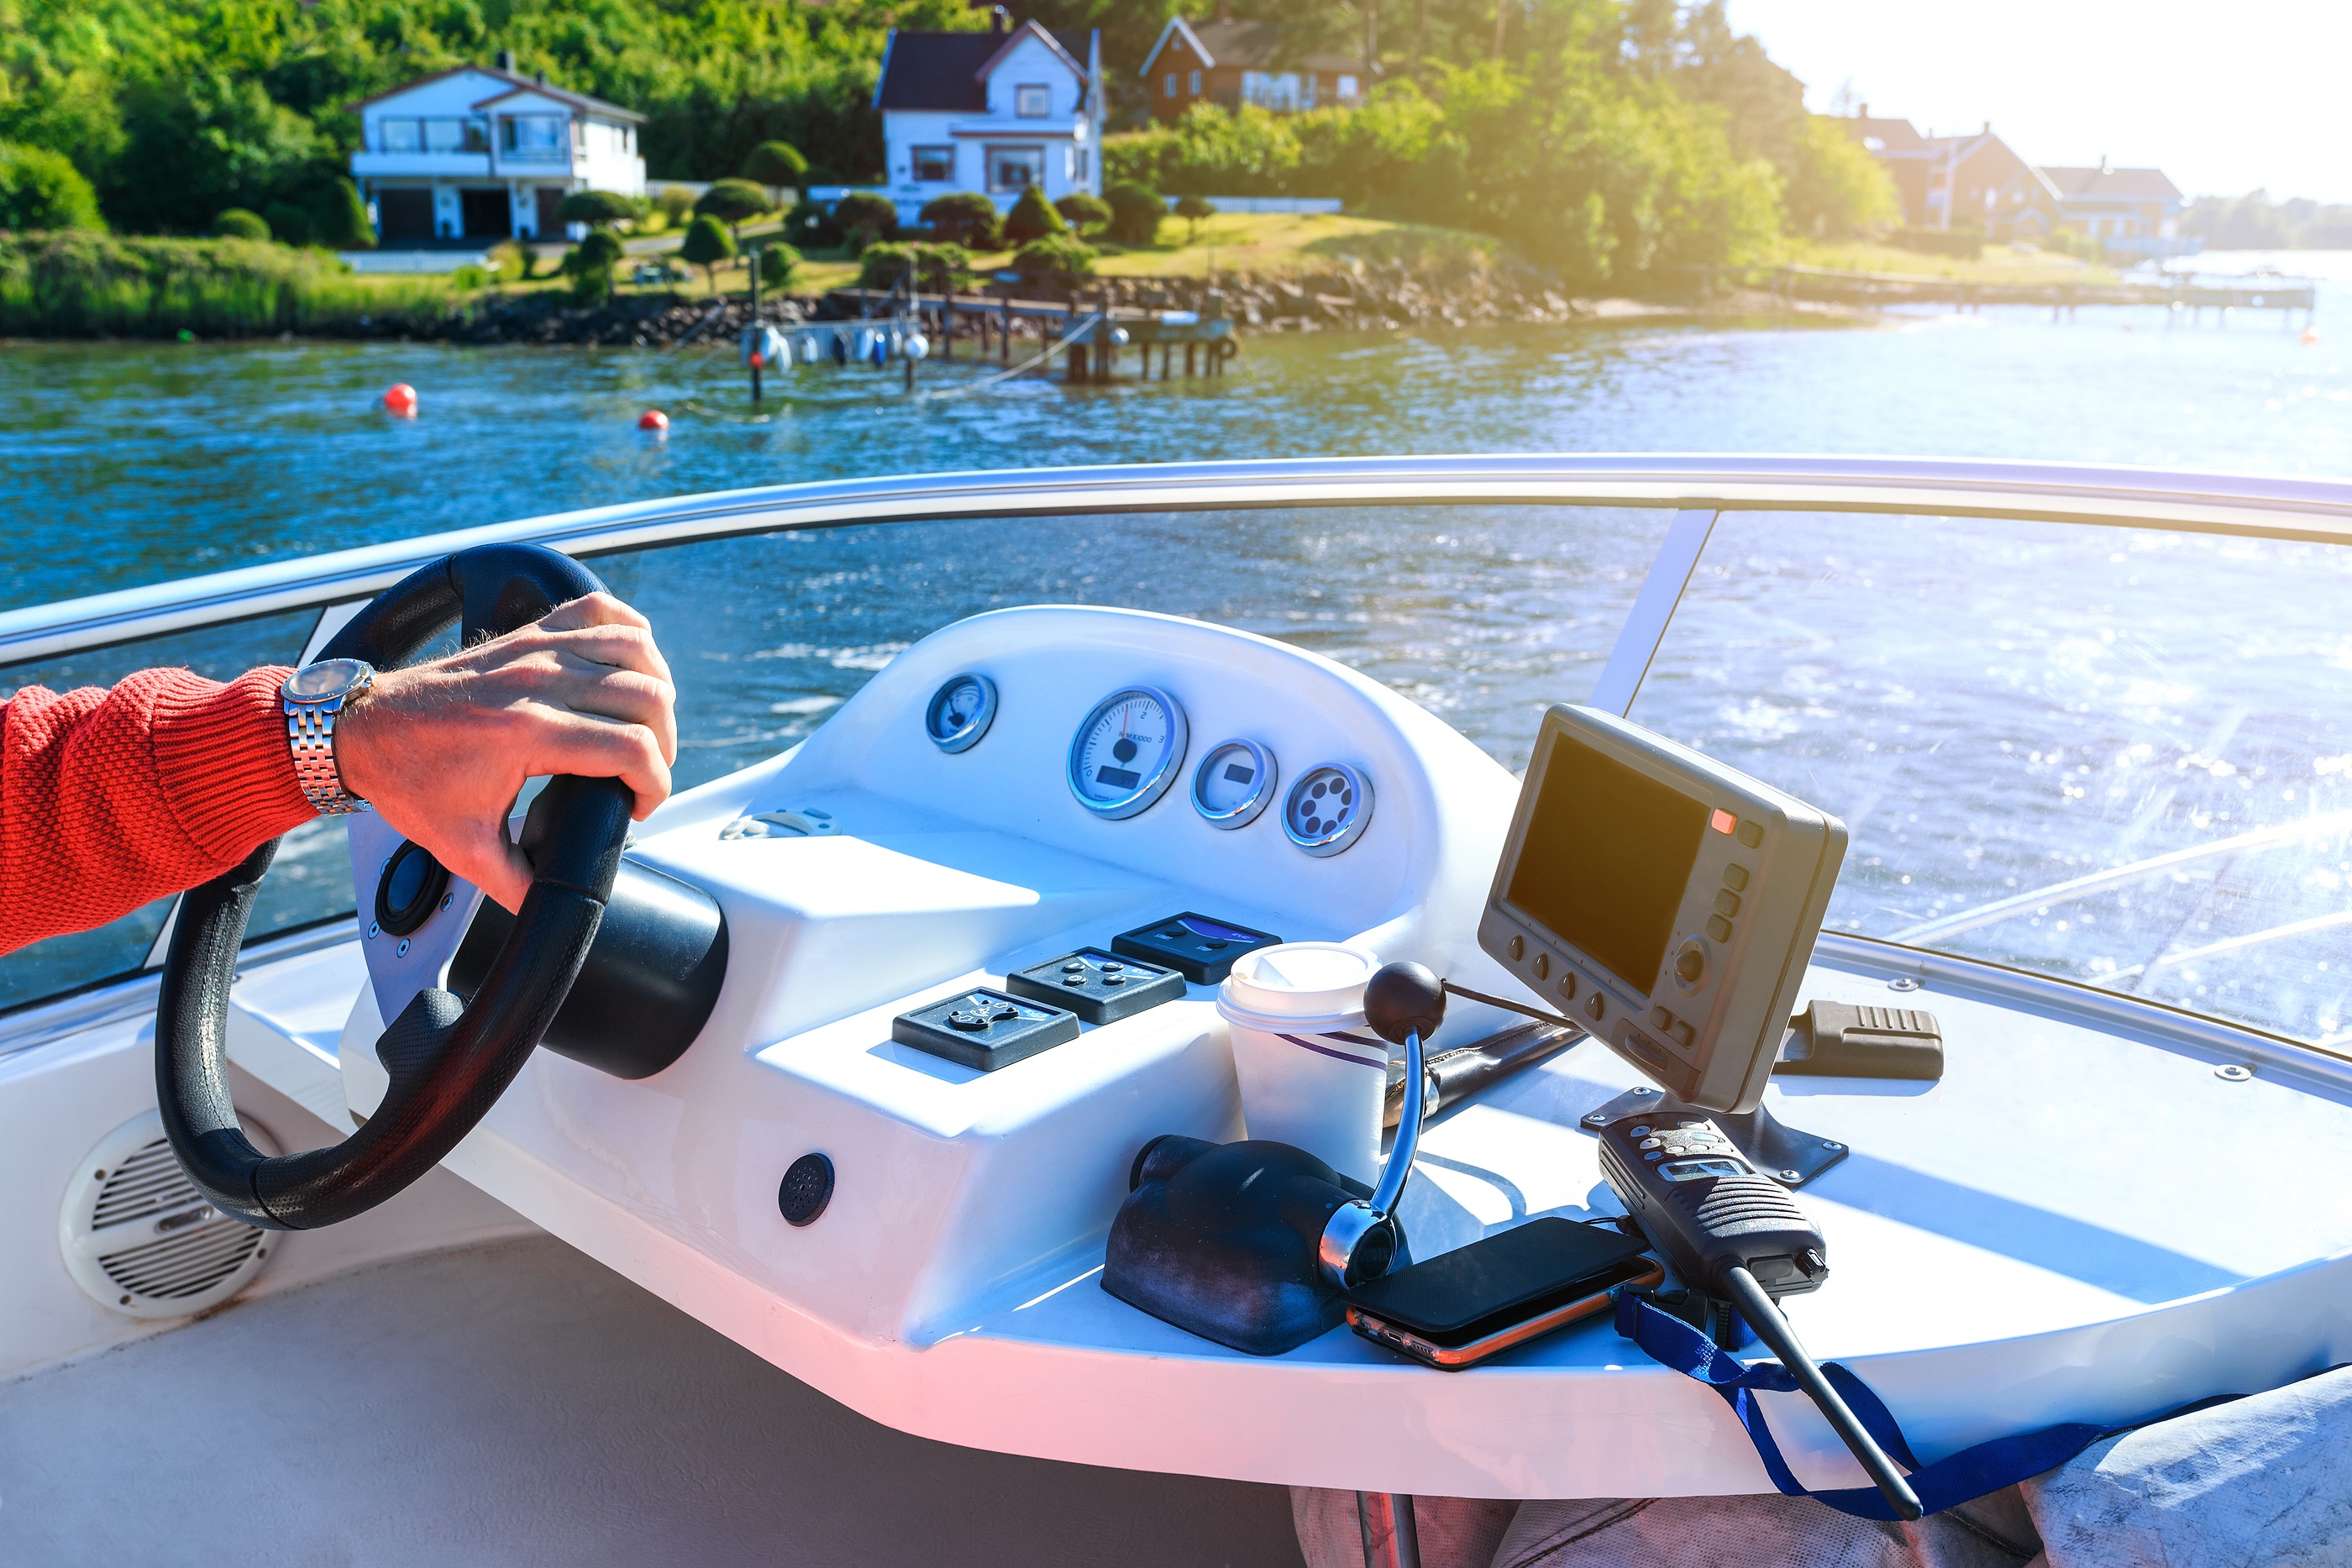 DUI Charges Also Relate to Boat Operation